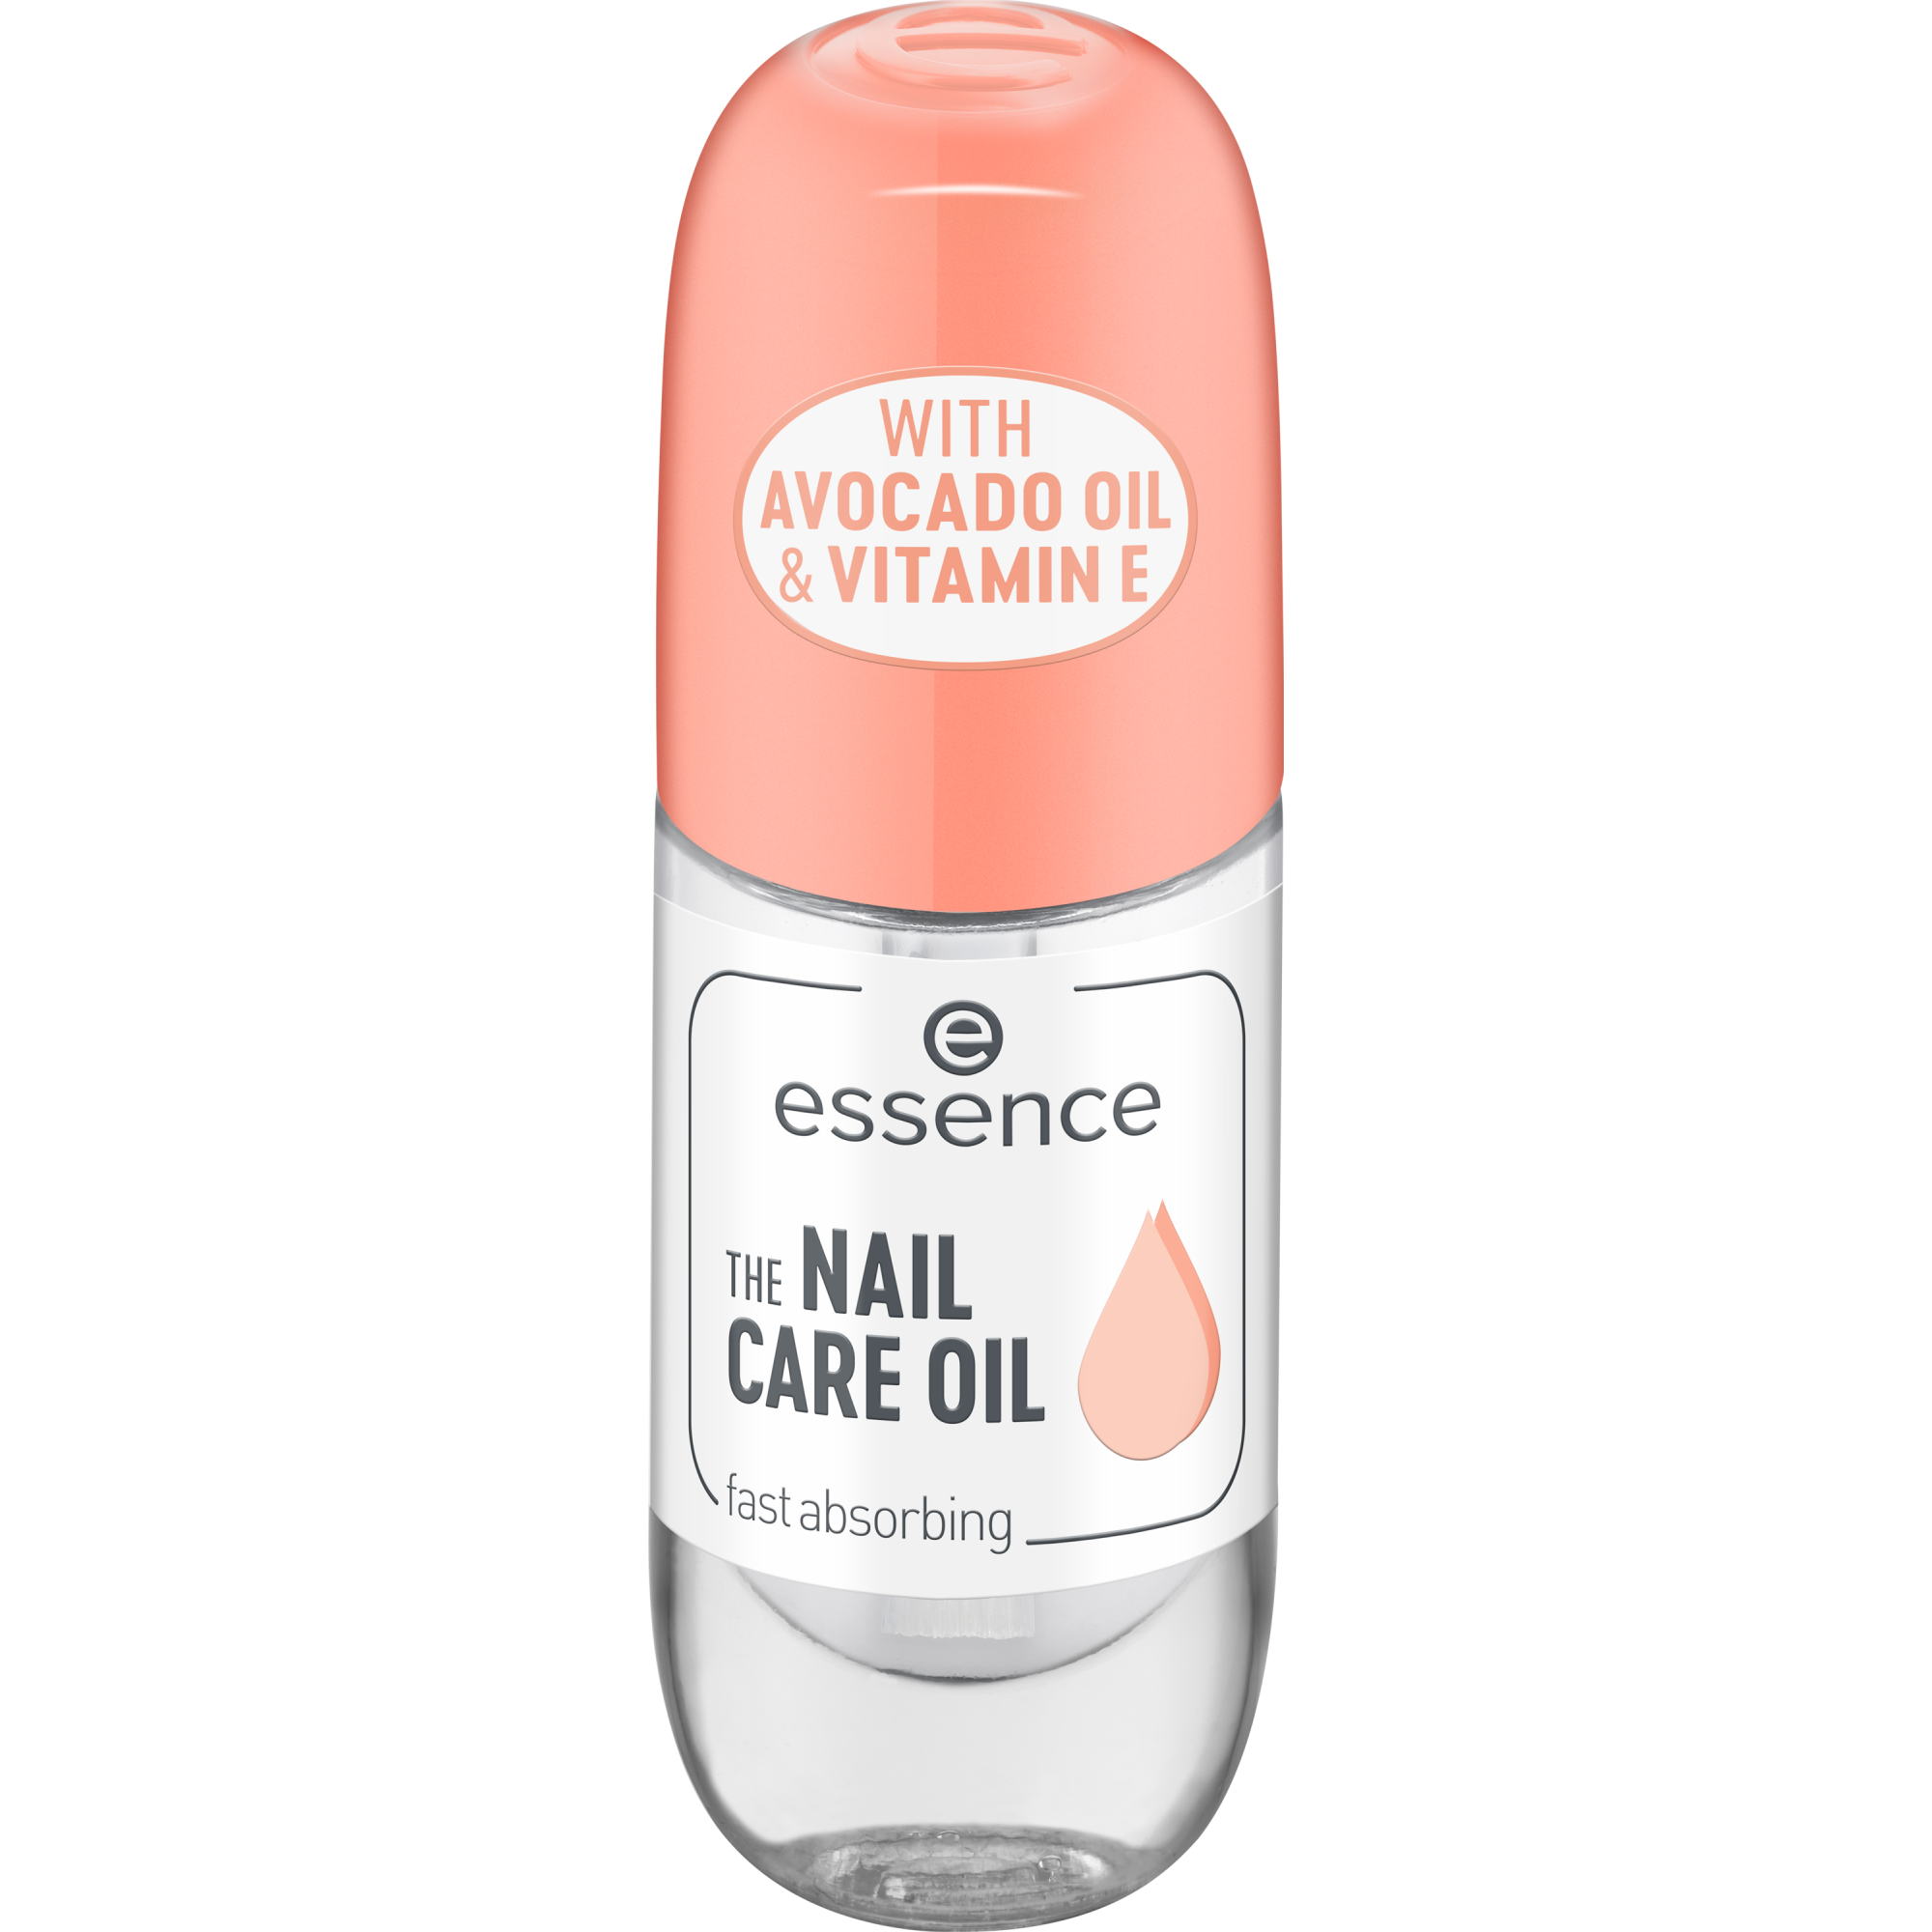 THE NAIL CARE OIL